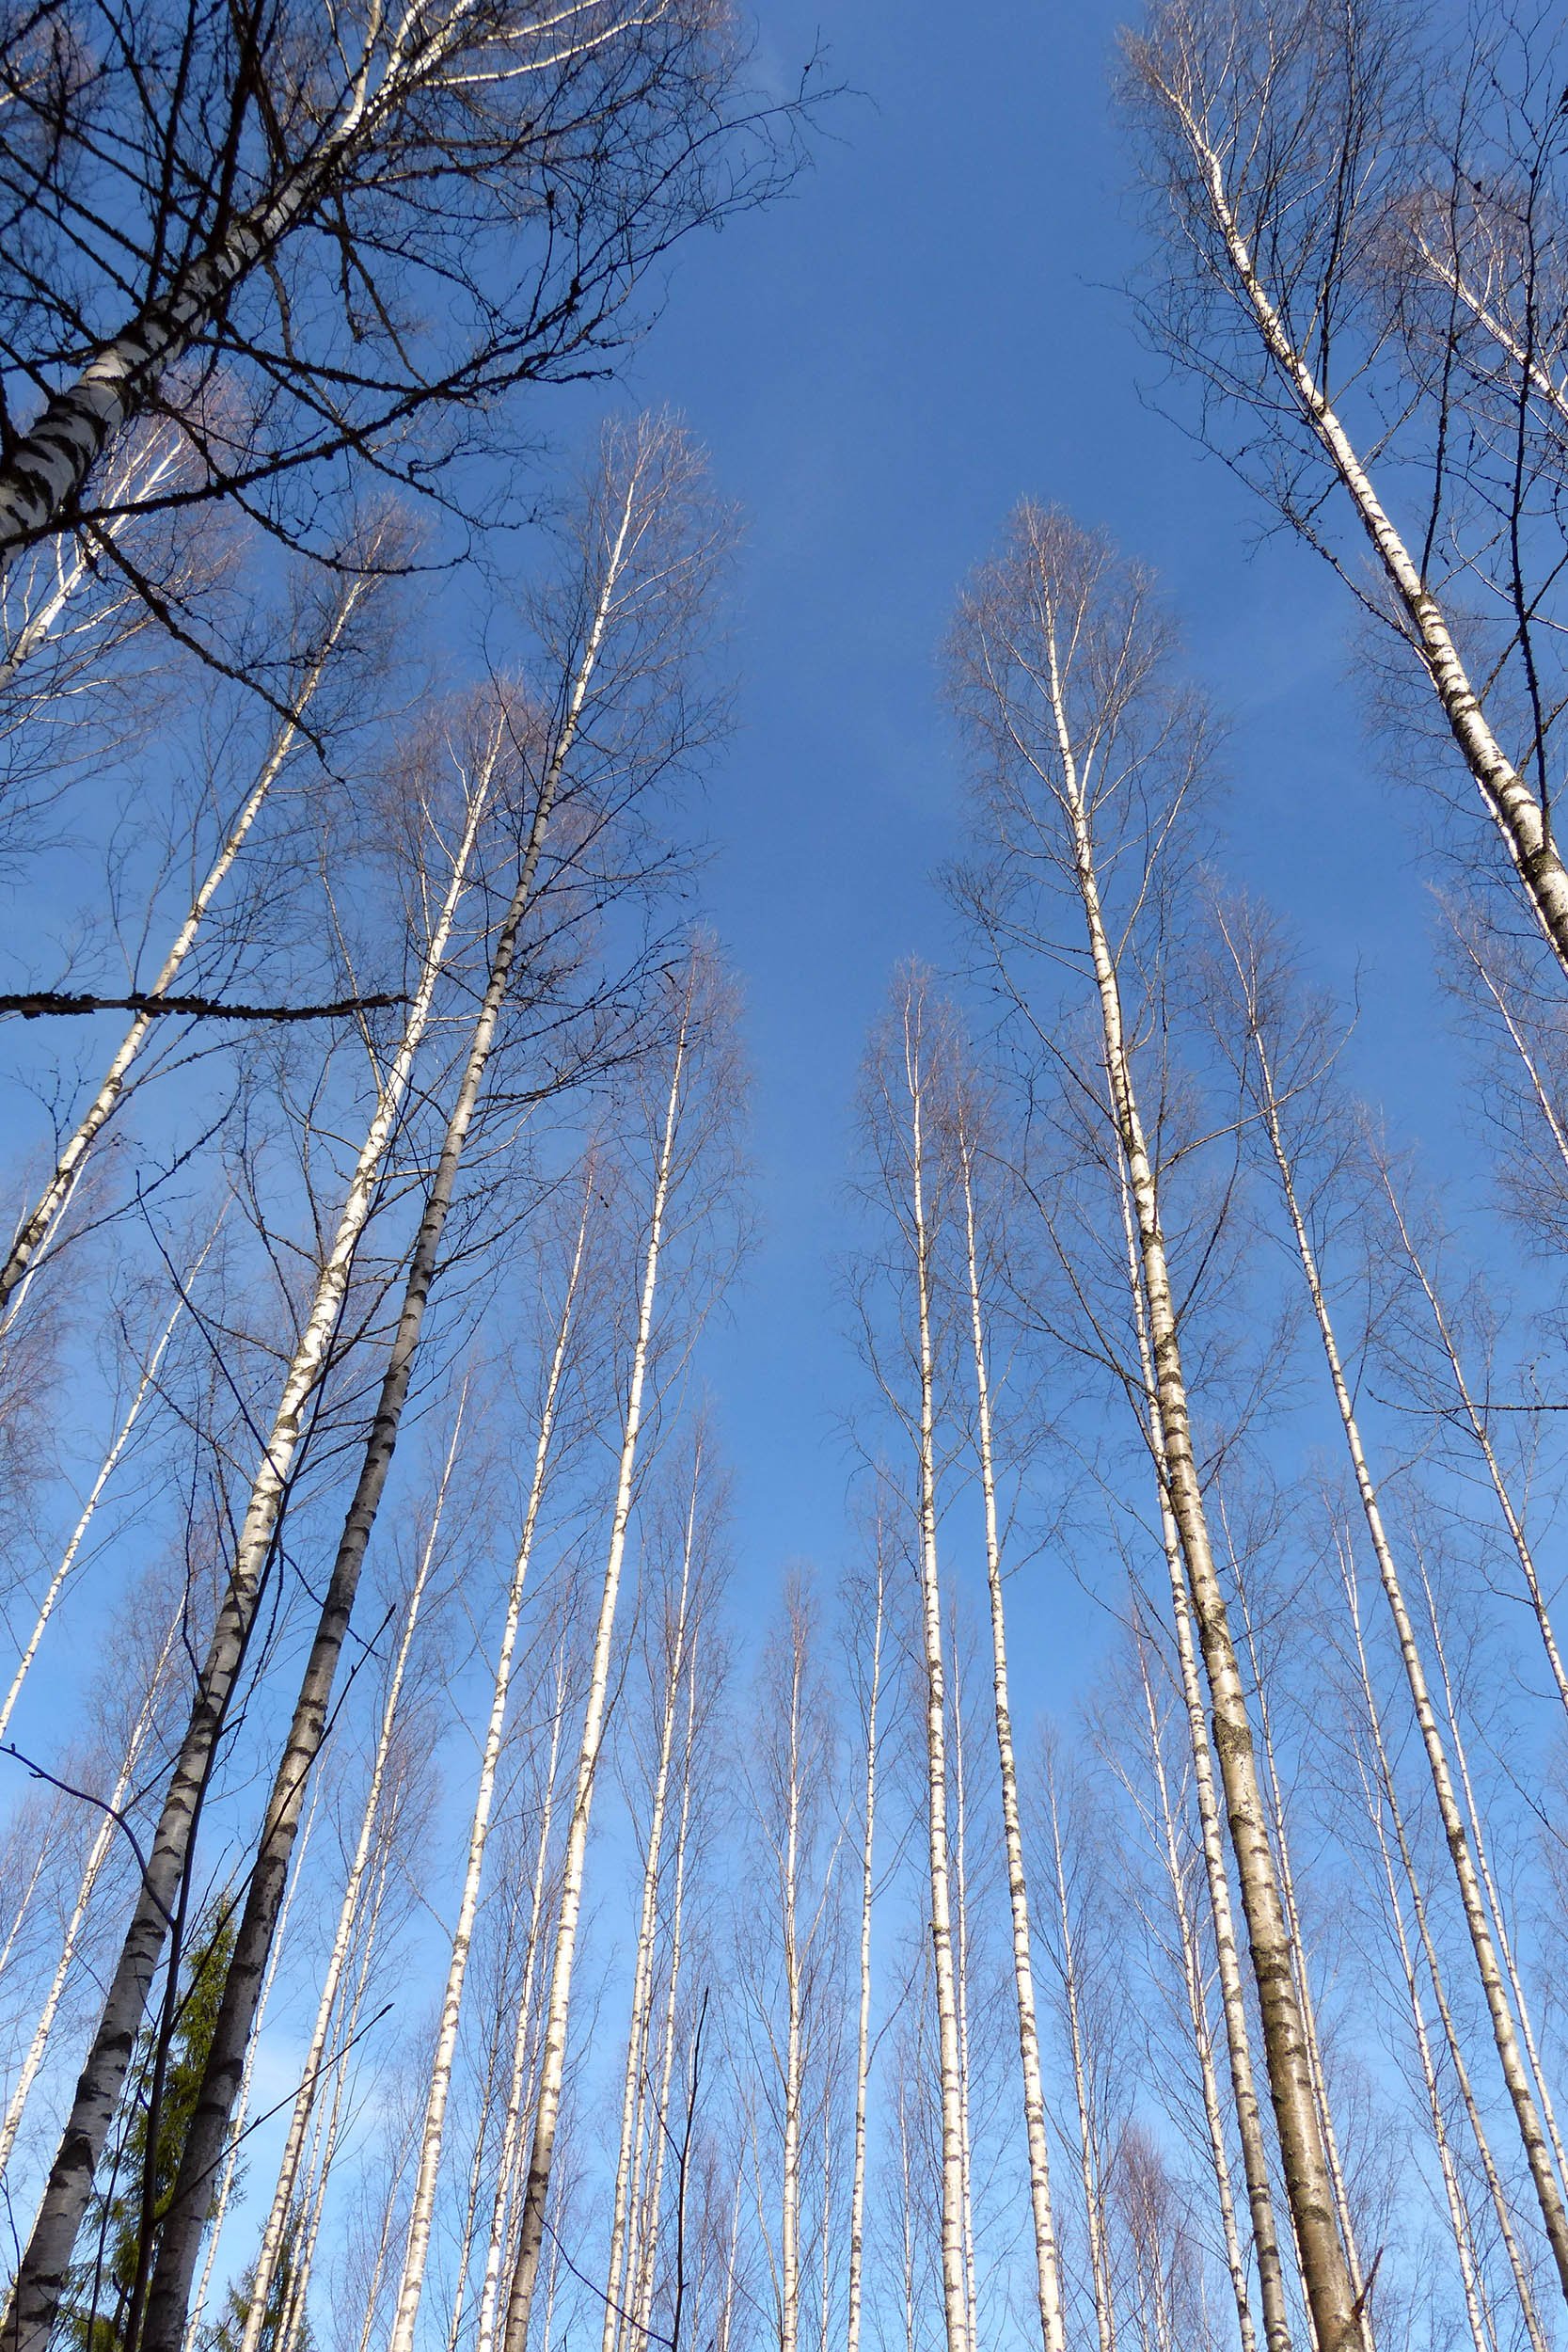 In_a_birch_forest_looking_up.jpg